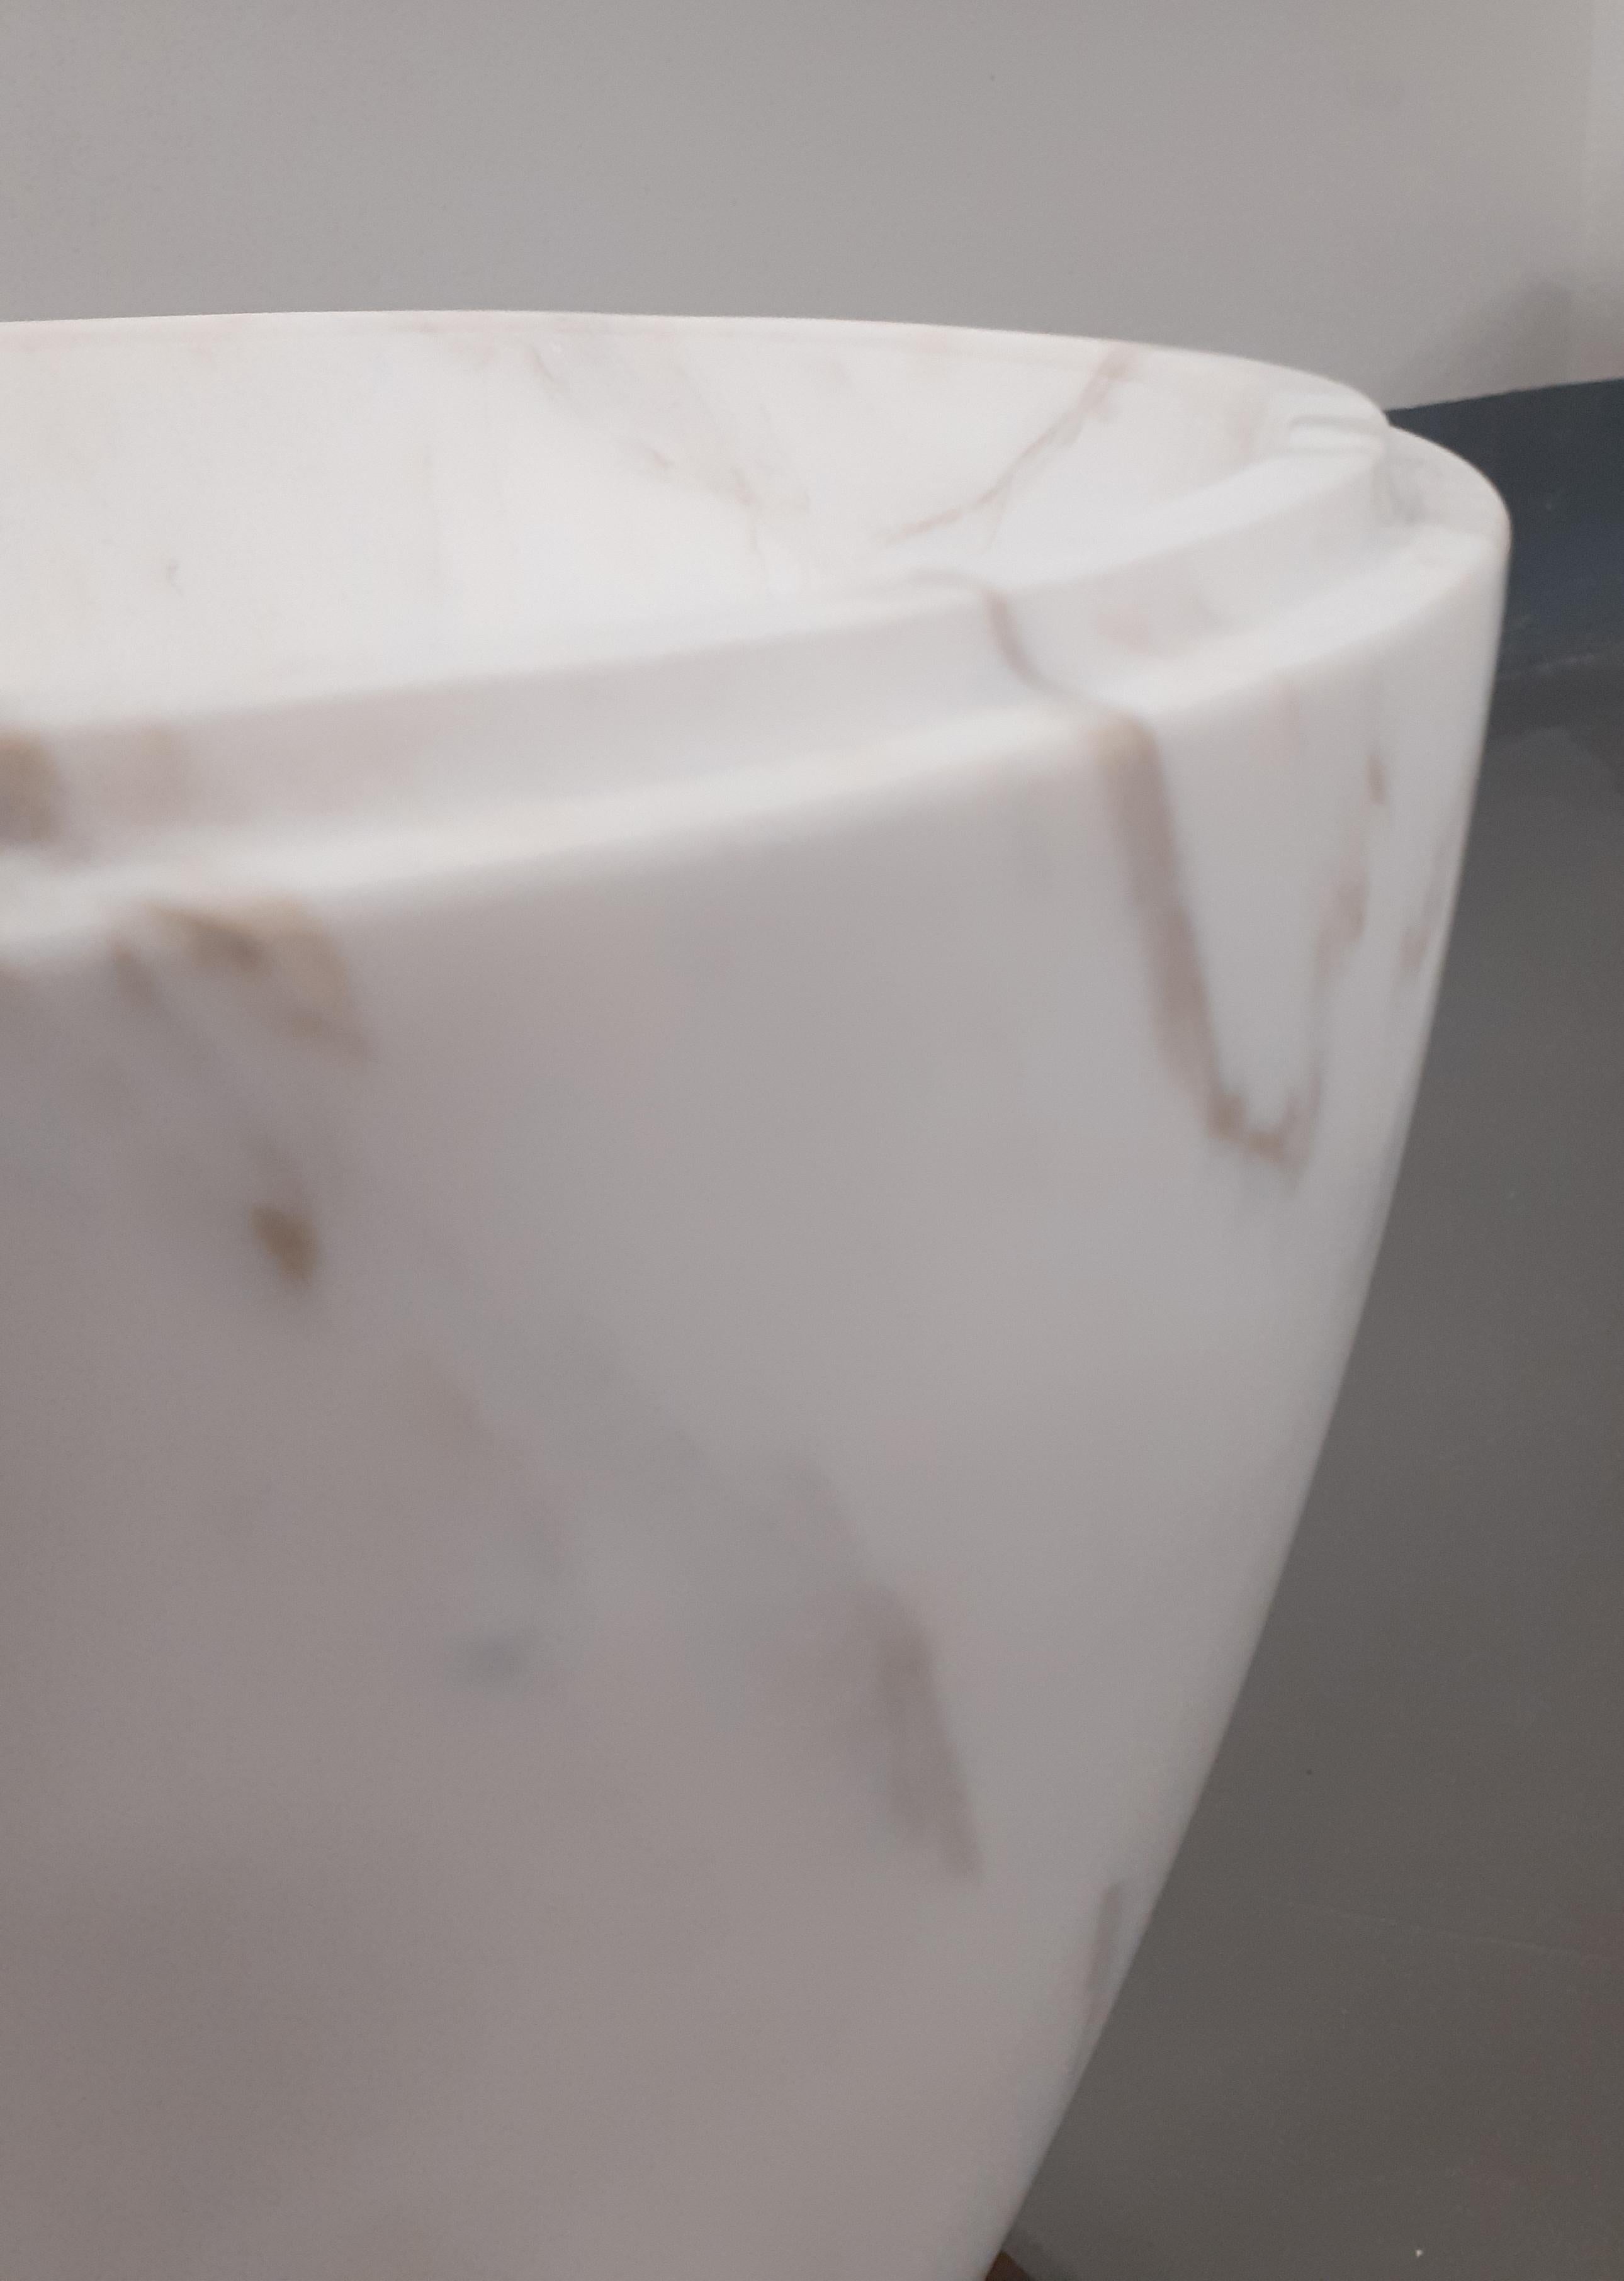 21st Century by M.De Lucchi Sculpture Marble Vase in White Carrara and Calacatta In New Condition For Sale In massa, IT